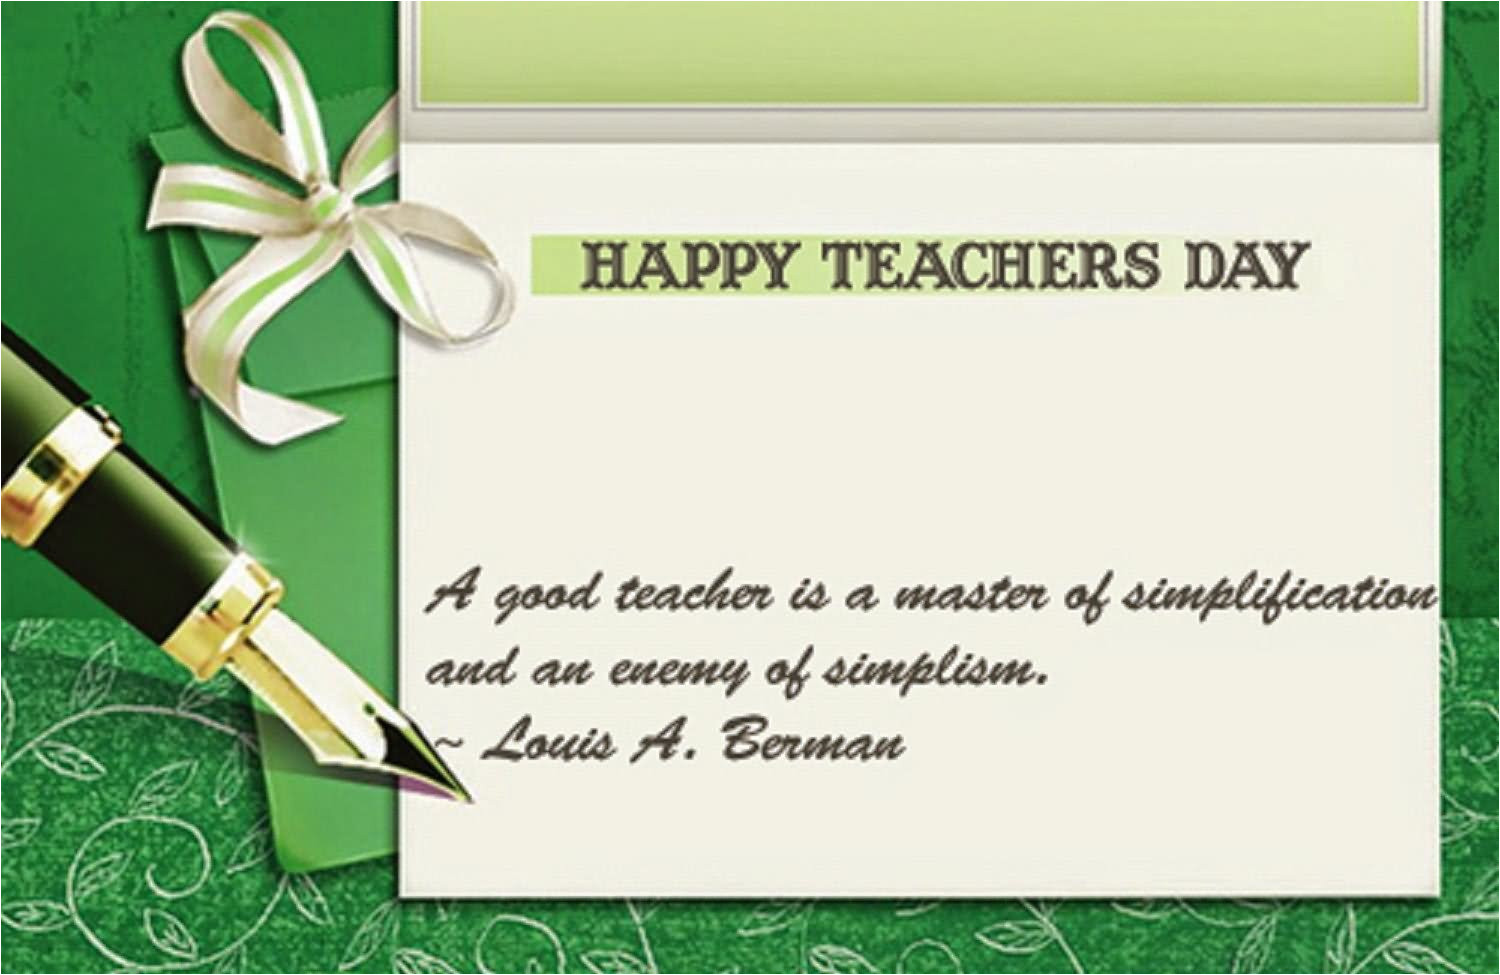 messages to write on teachers day card